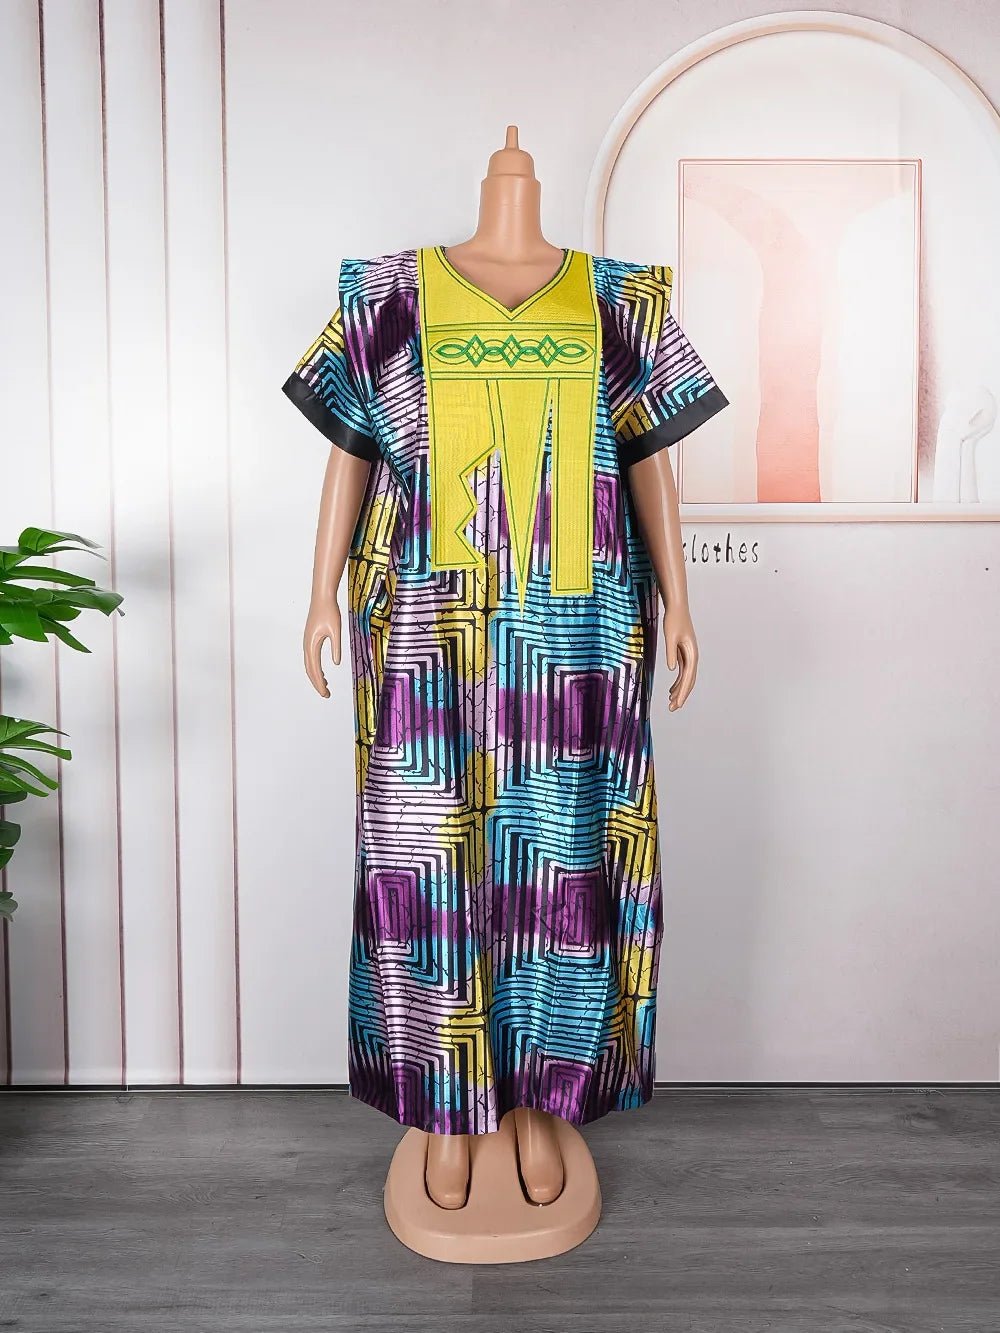 Elegant African Abayas: Fashionable Dresses for Women - Dashiki Inspired Evening Gowns - Flexi Africa - Flexi Africa offers Free Delivery Worldwide - Vibrant African traditional clothing showcasing bold prints and intricate designs